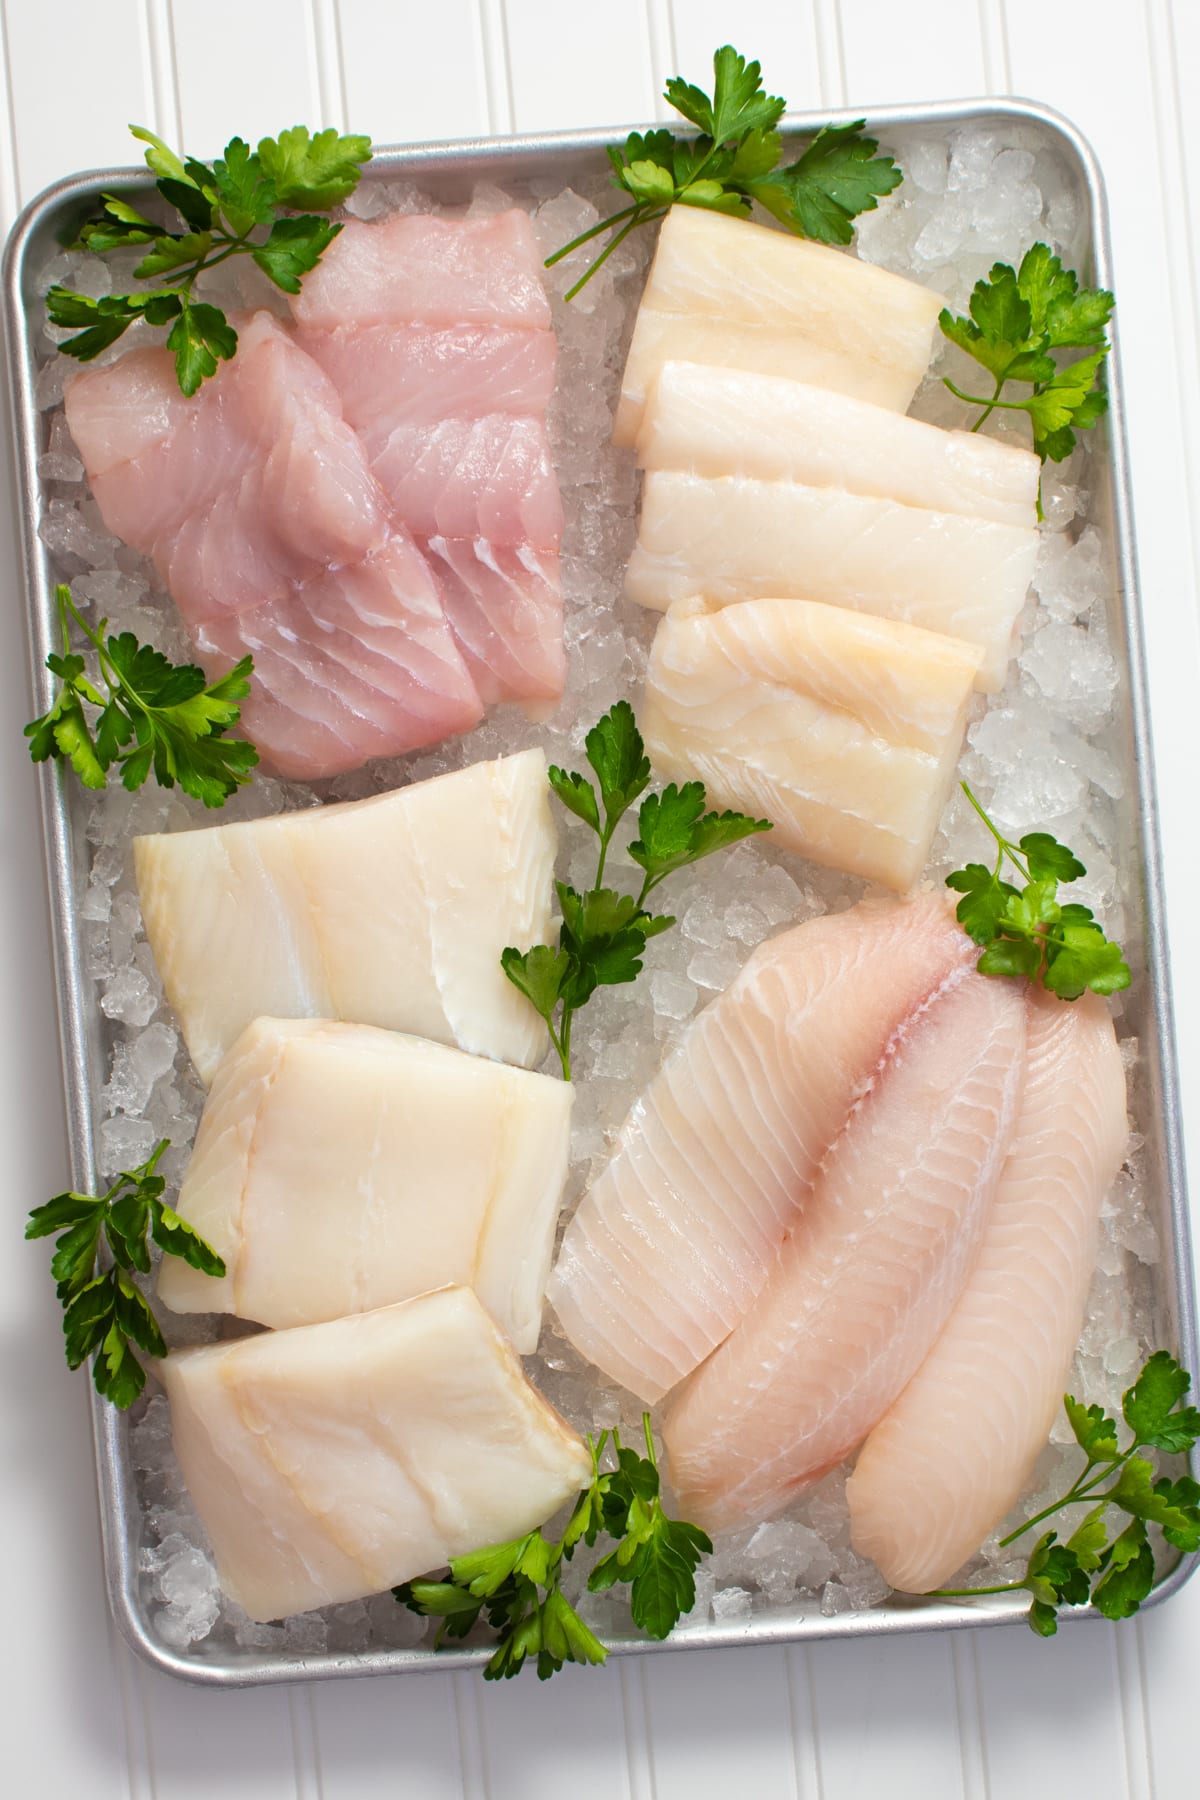 How to Choose Fish Fillets